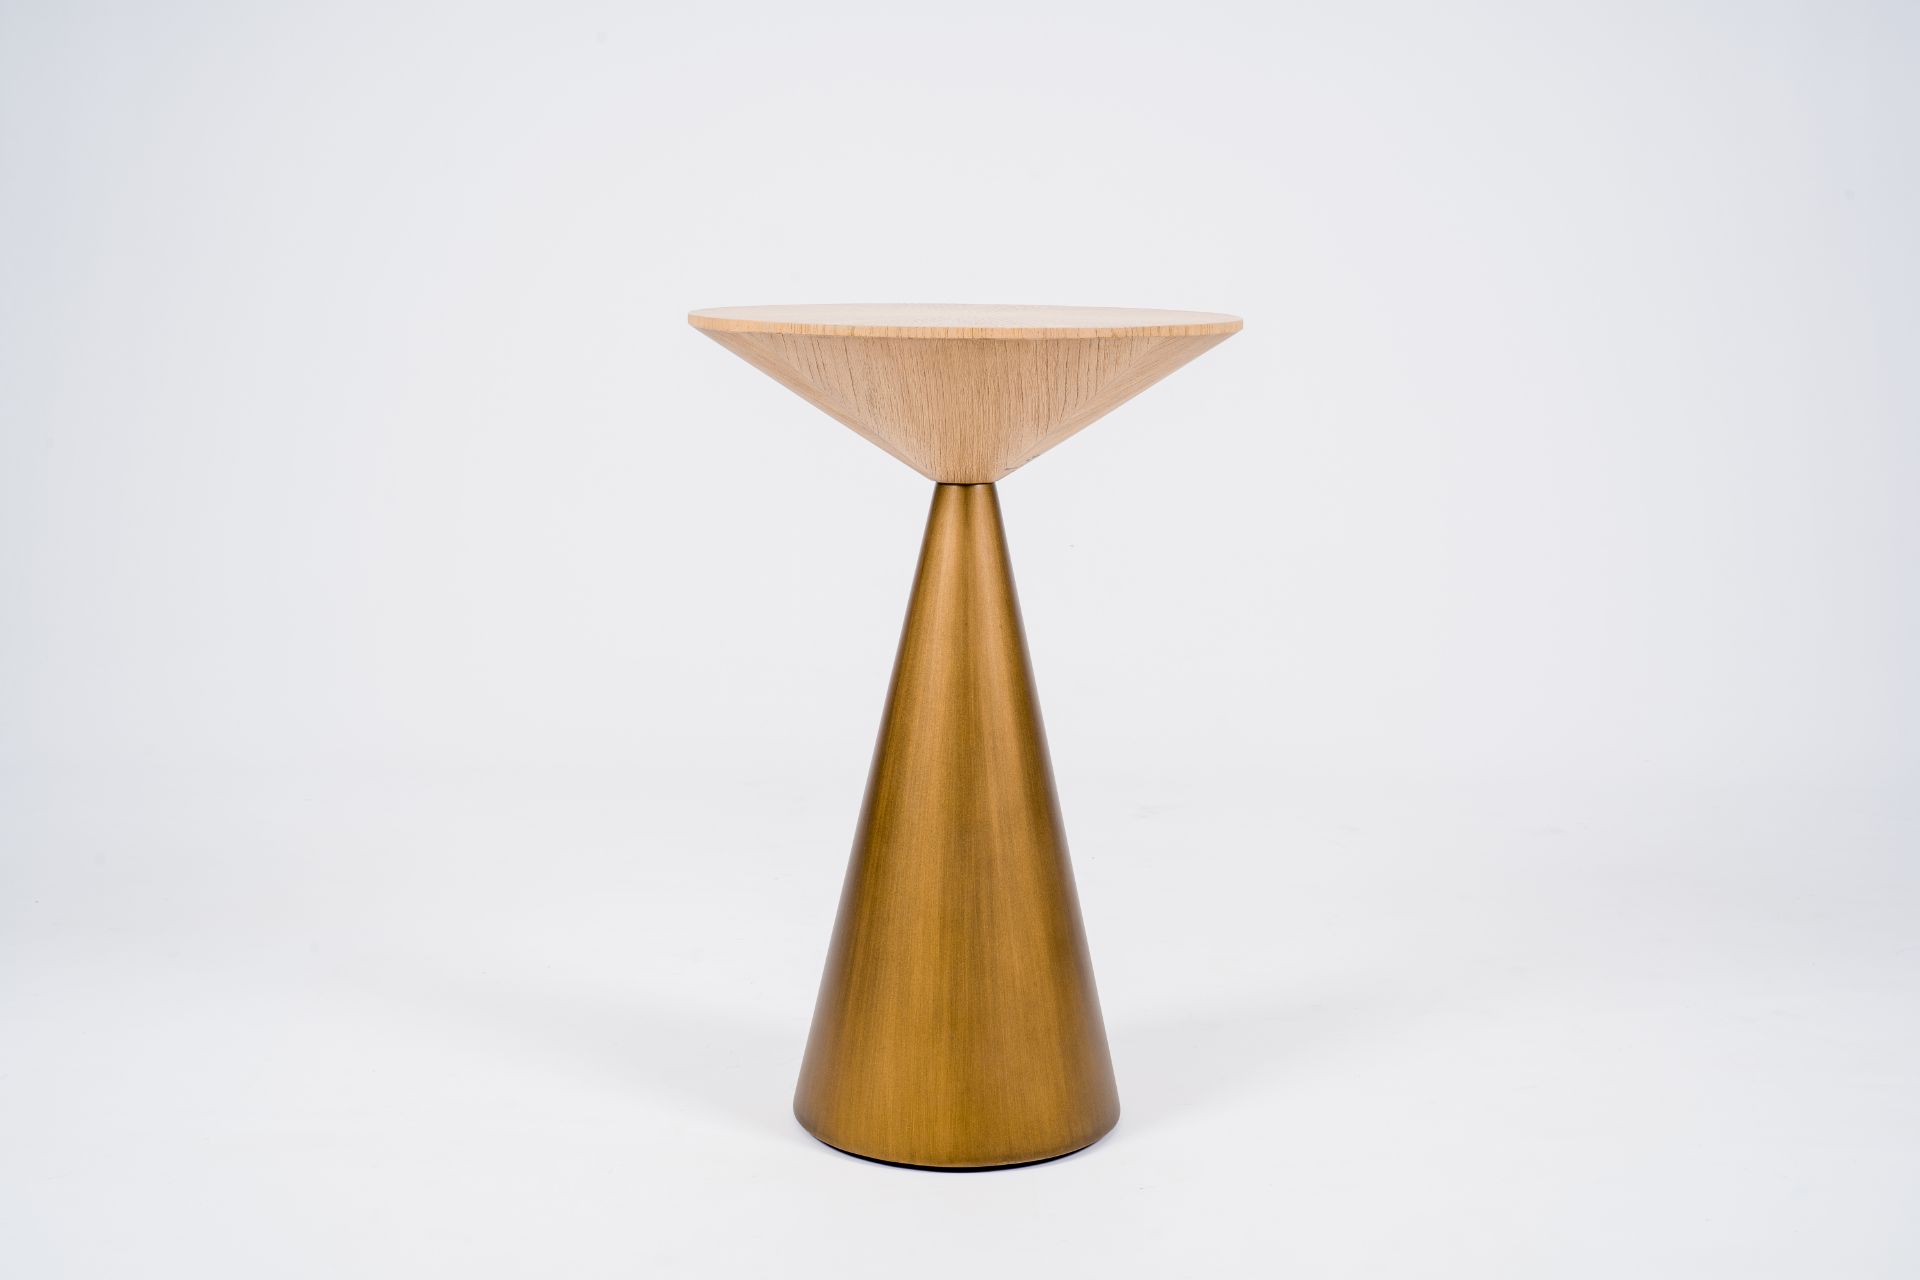 Olivier De Schrijver (1958): A partly gold-coloured solid wood Lily table, ed. 4/60, 21st C. - Image 5 of 9